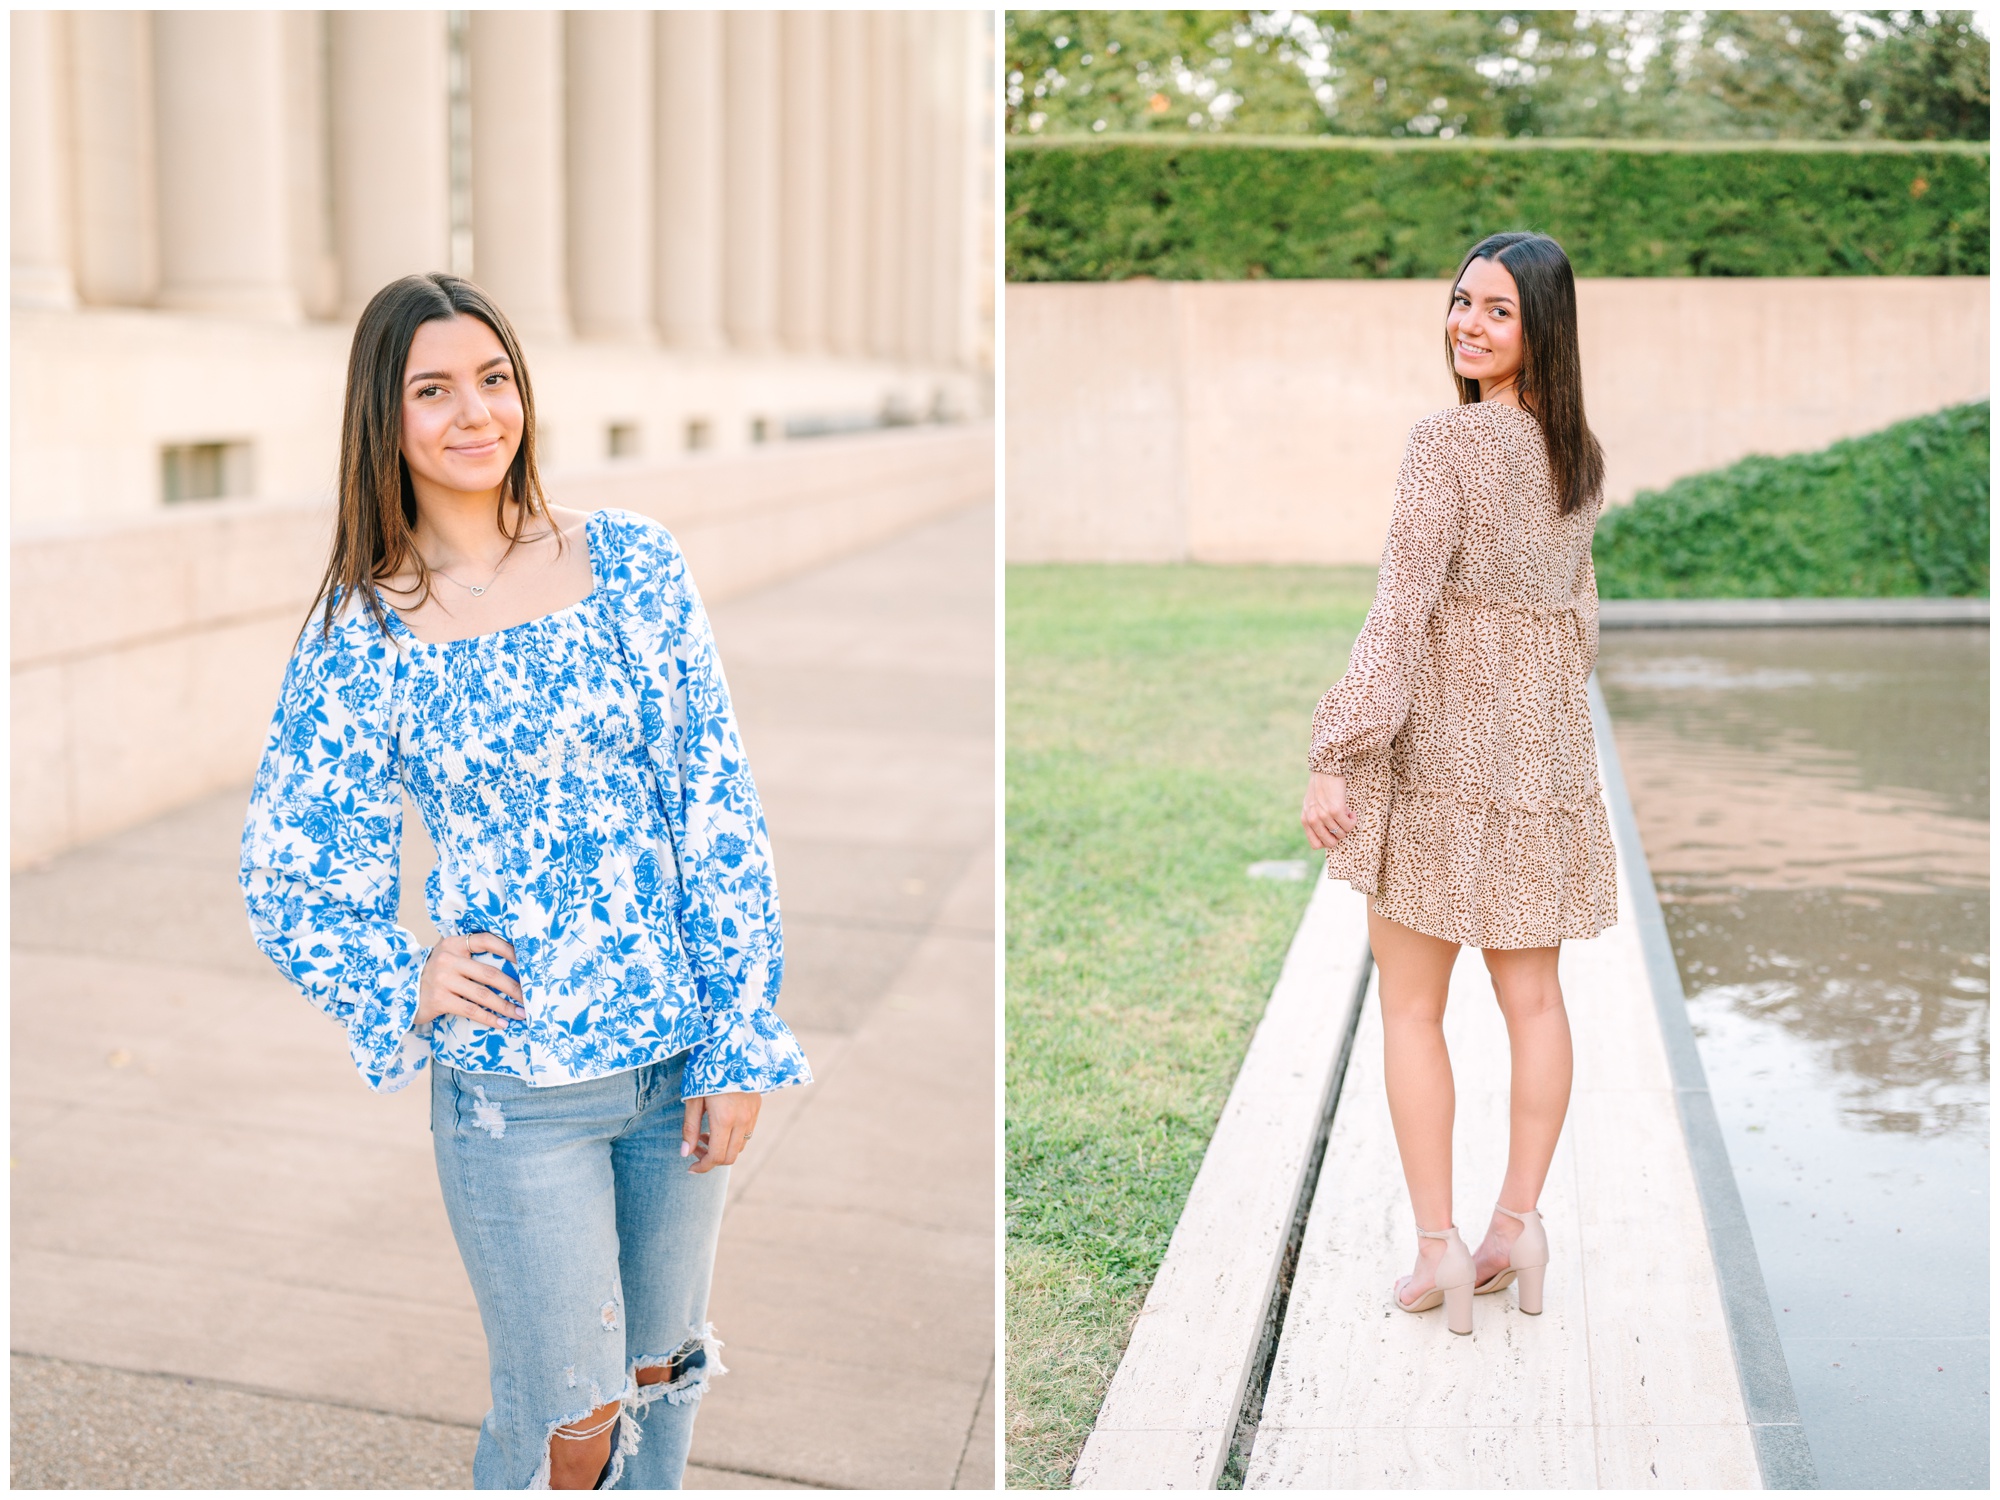 Downtown Fort Worth | Downtown Fort Worth Senior Session | Godley High School | Lauren Grimes Photography